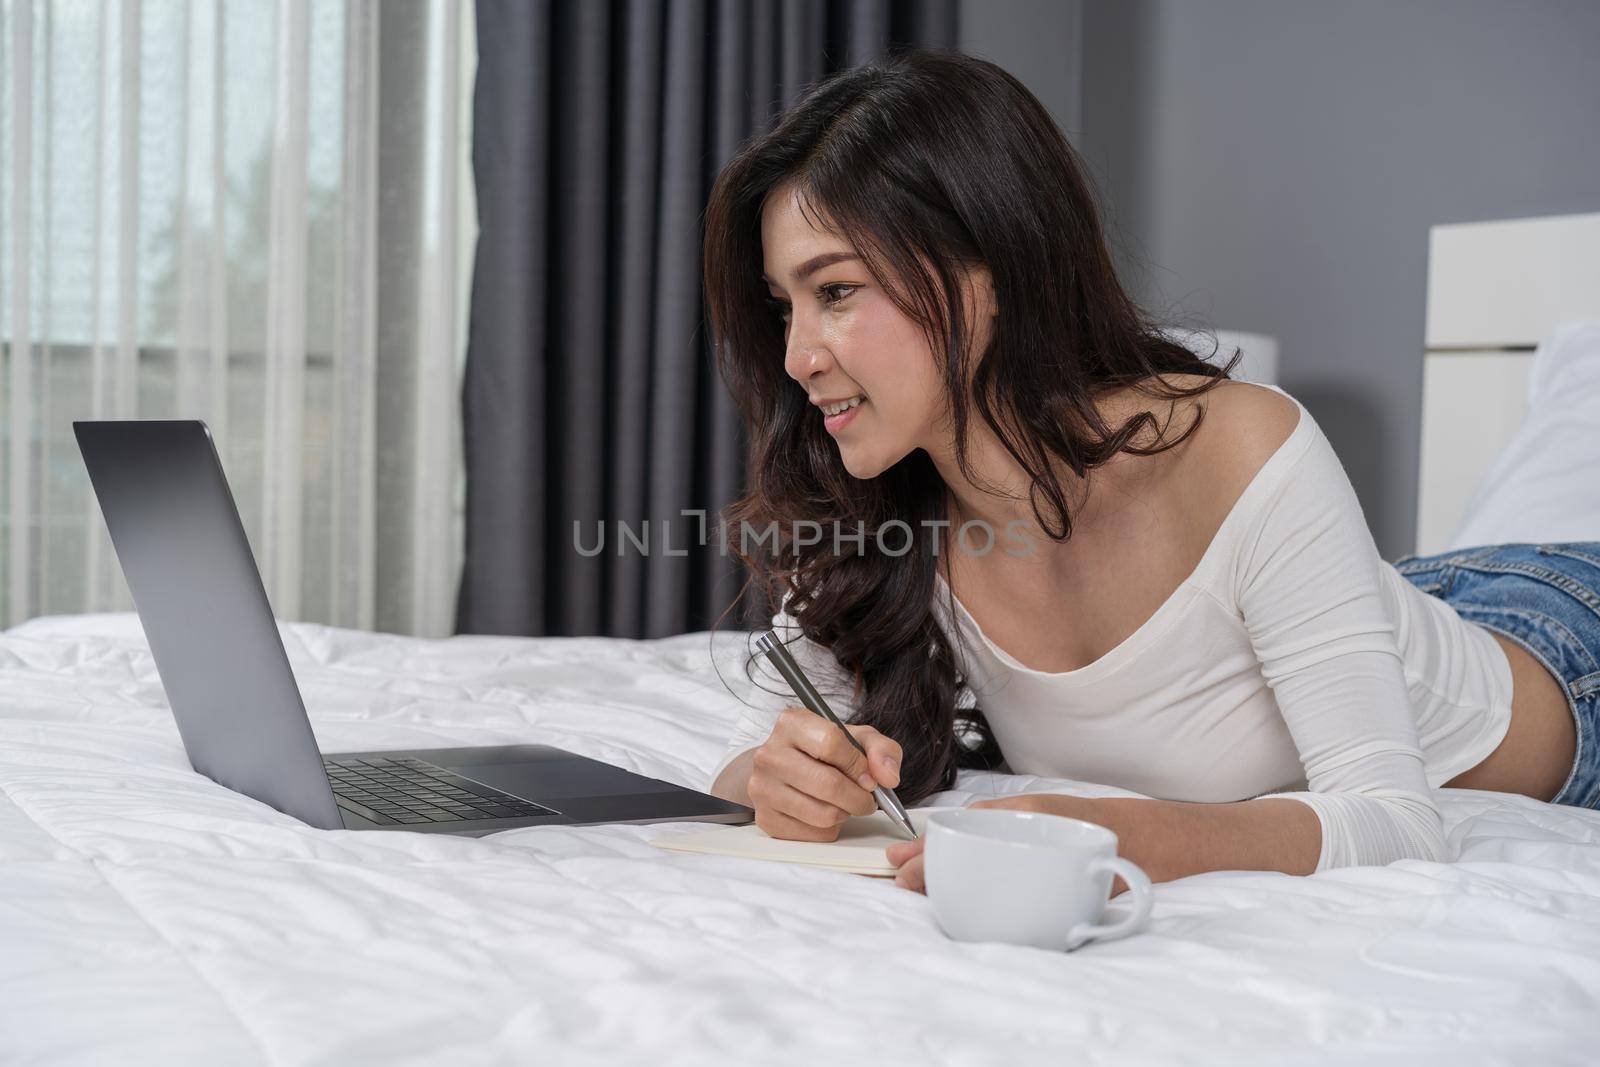 woman writing notebook and using laptop computer on a bed